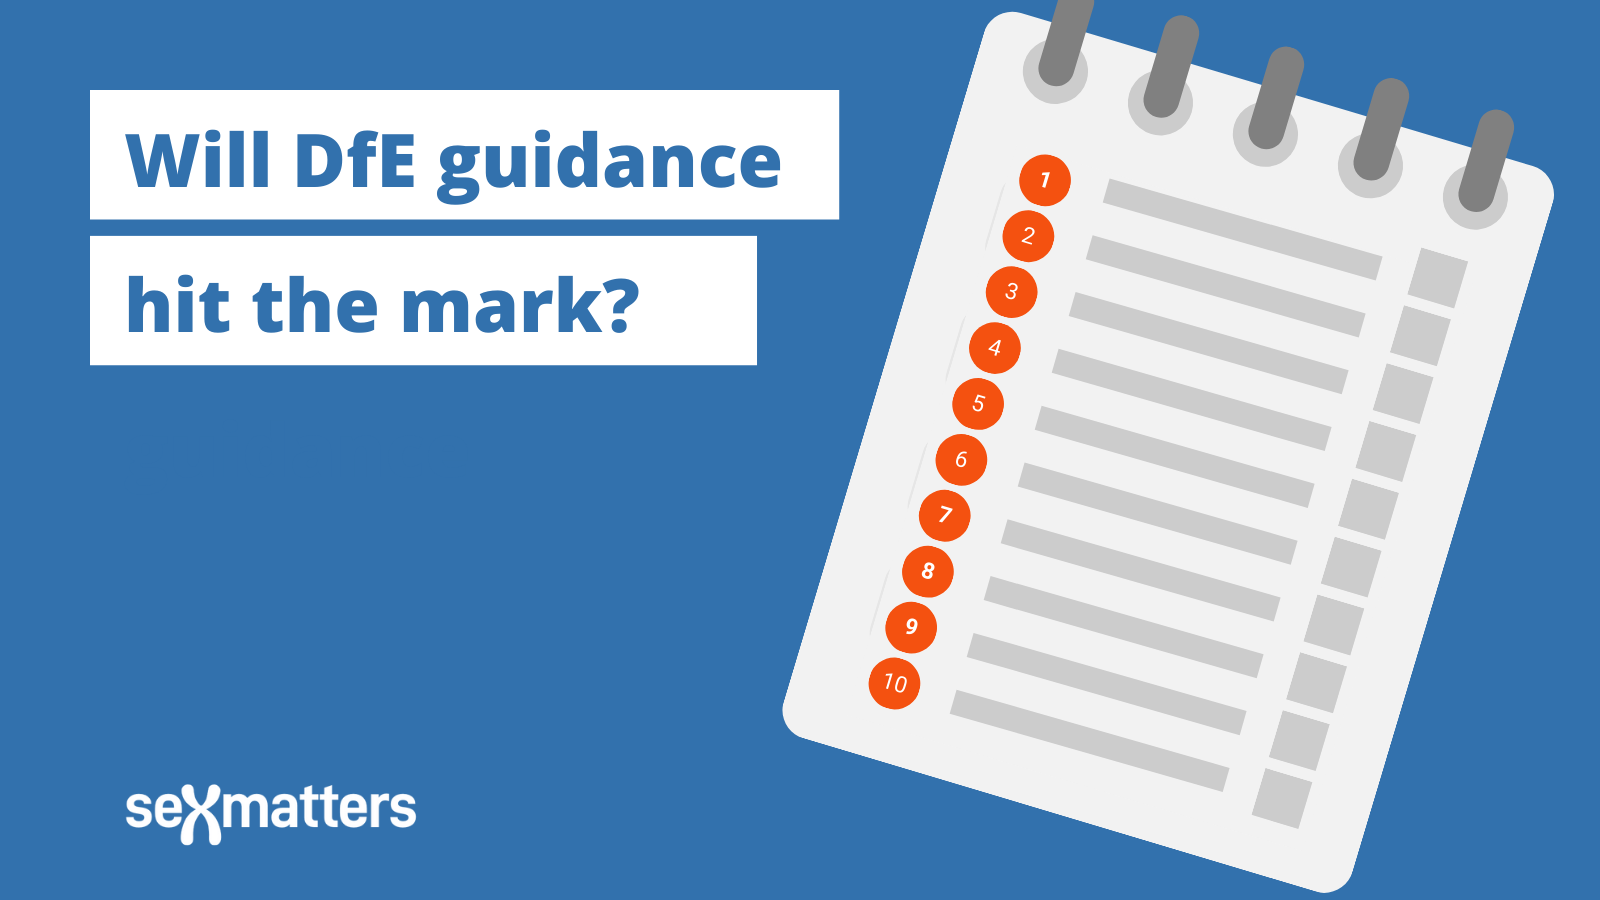 Will DfE guidance hit the mark?